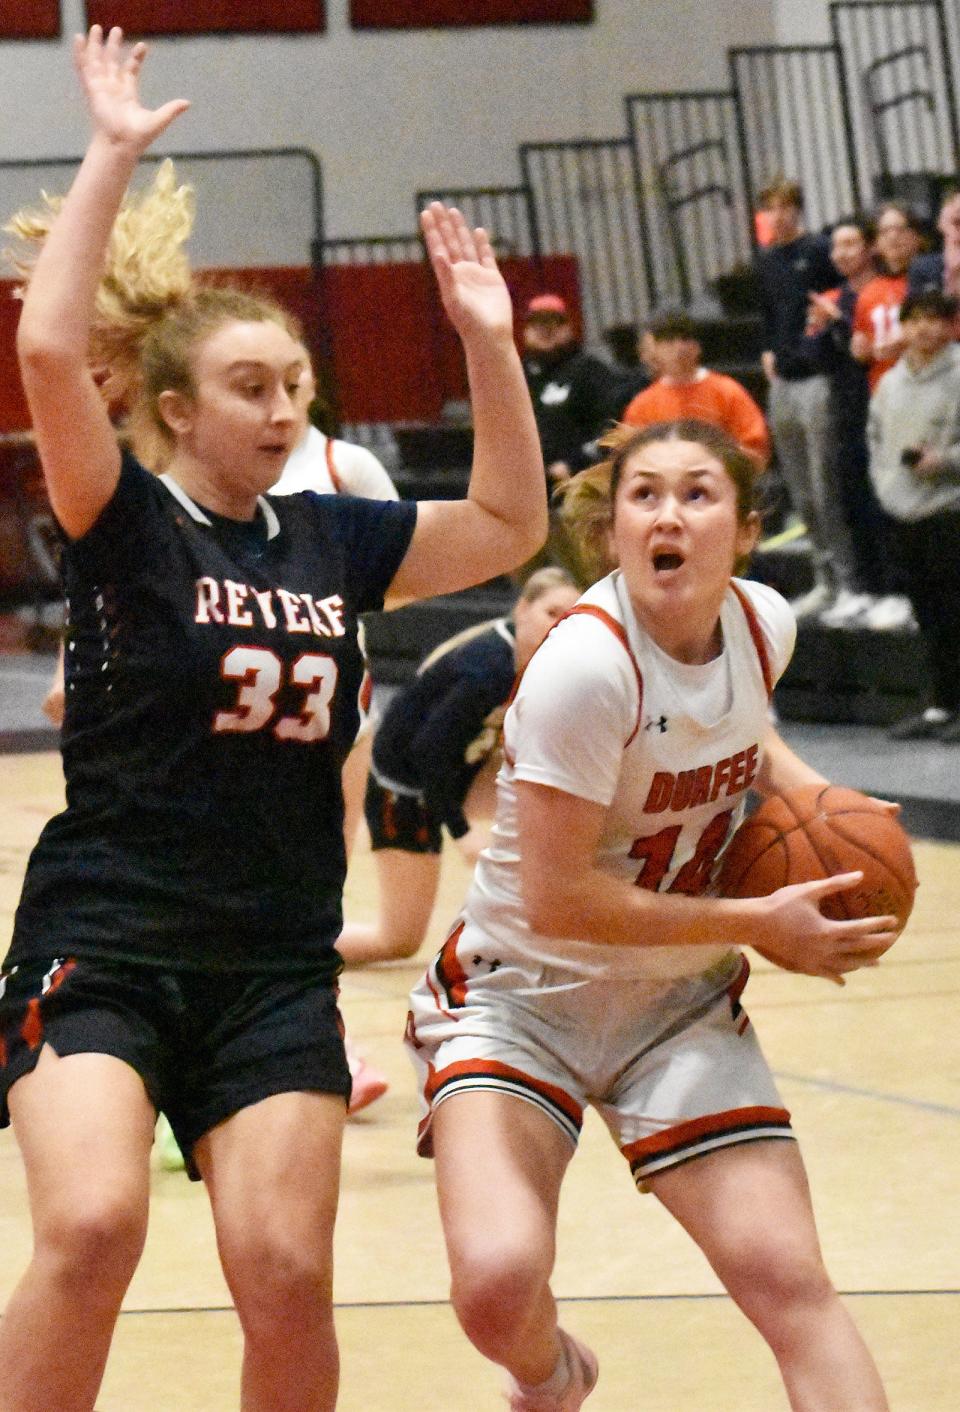 Durfee's Maggie O'Connell looks for two points against Revere's Belma Velic during Tuesday's Division I preliminary contest at B.M.C. Durfee High School in Fall River Feb. 27, 2024.